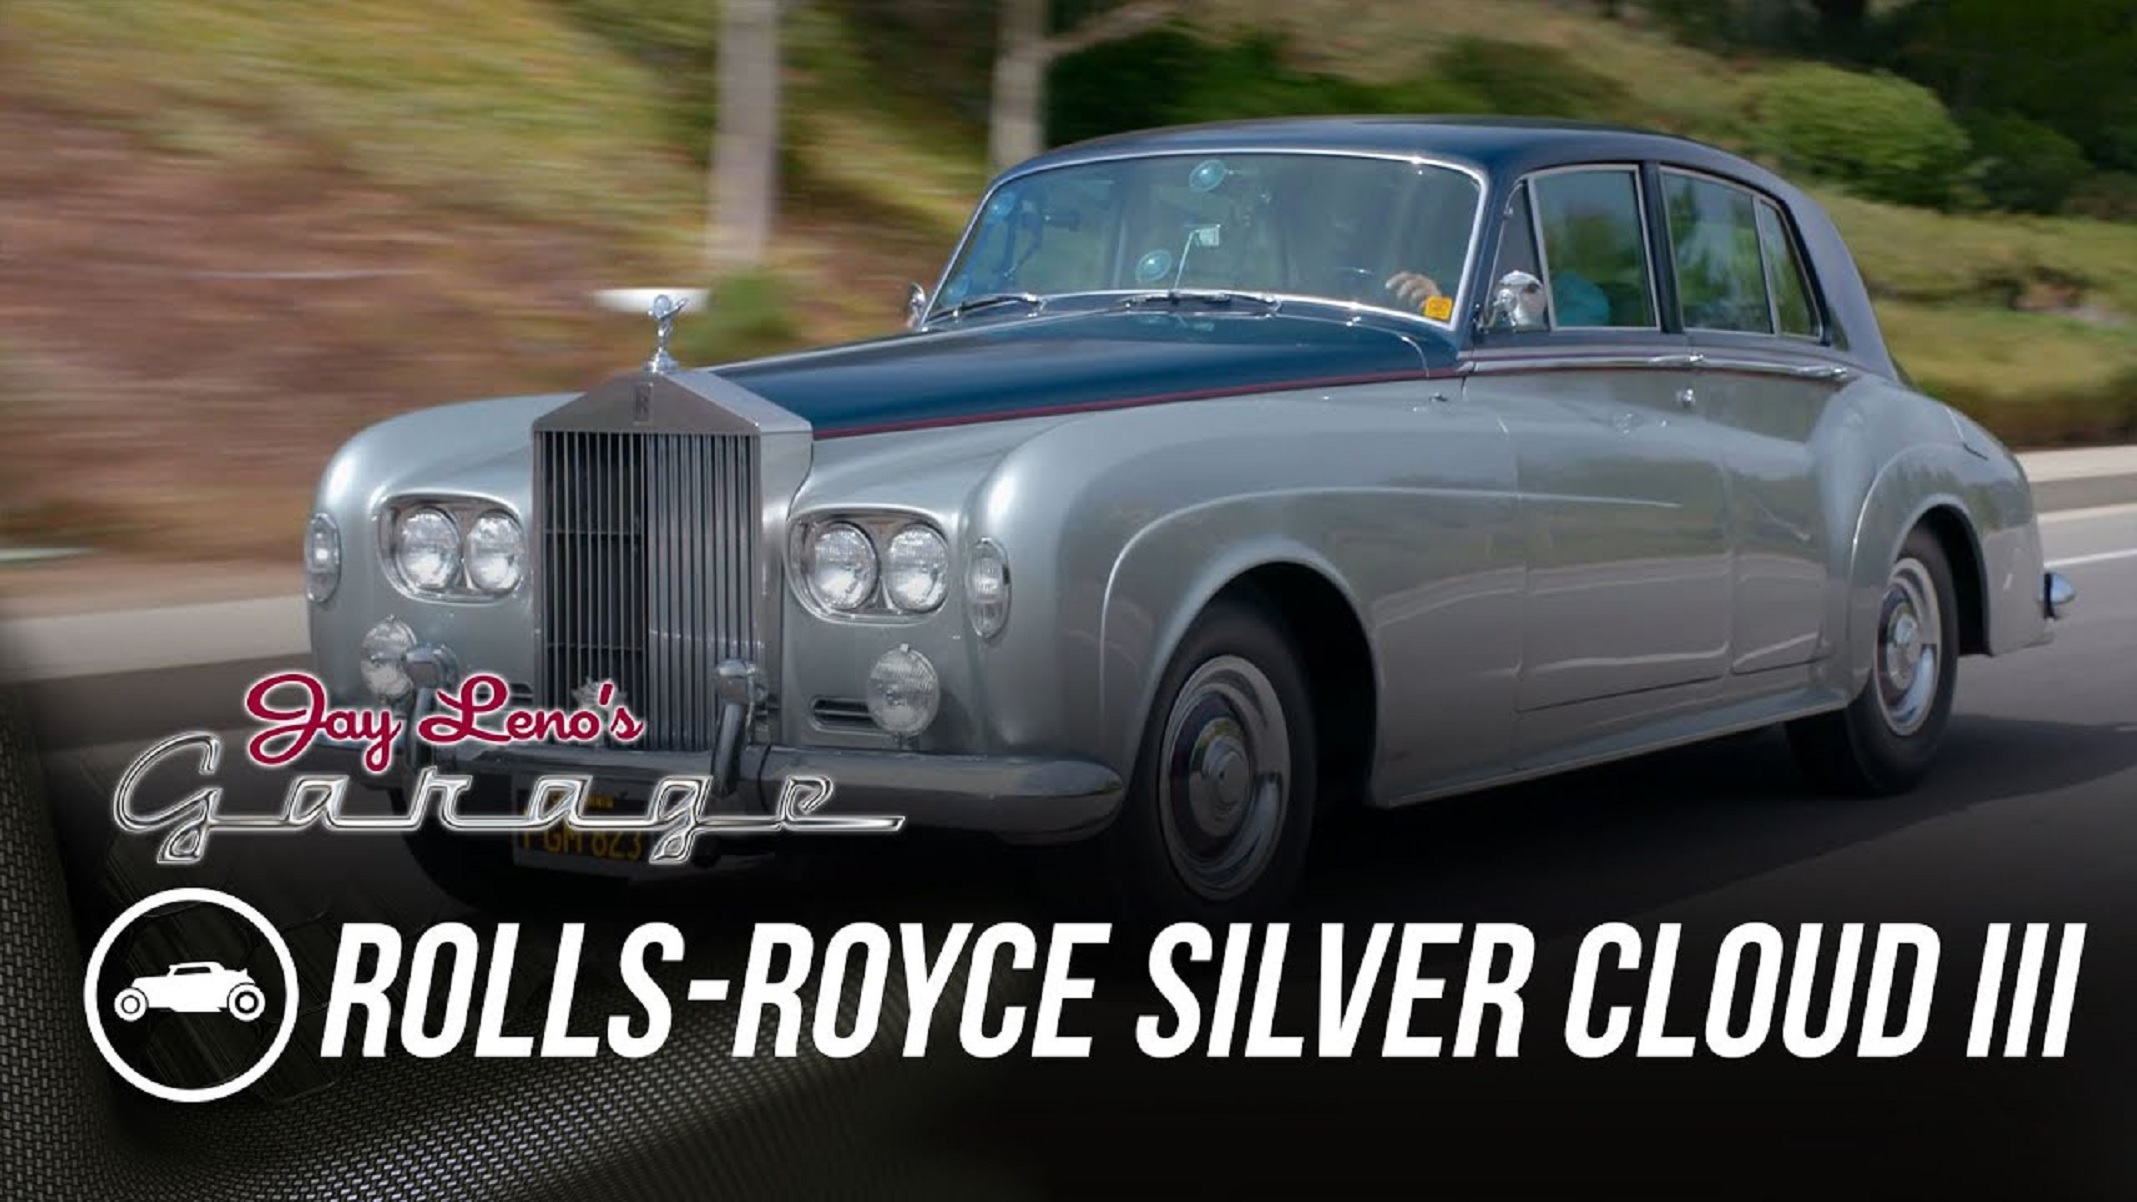 Jay Leno driving John Frankenheimer's silver-and-blue 1965 Rolls-Royce Silver Cloud III down the road